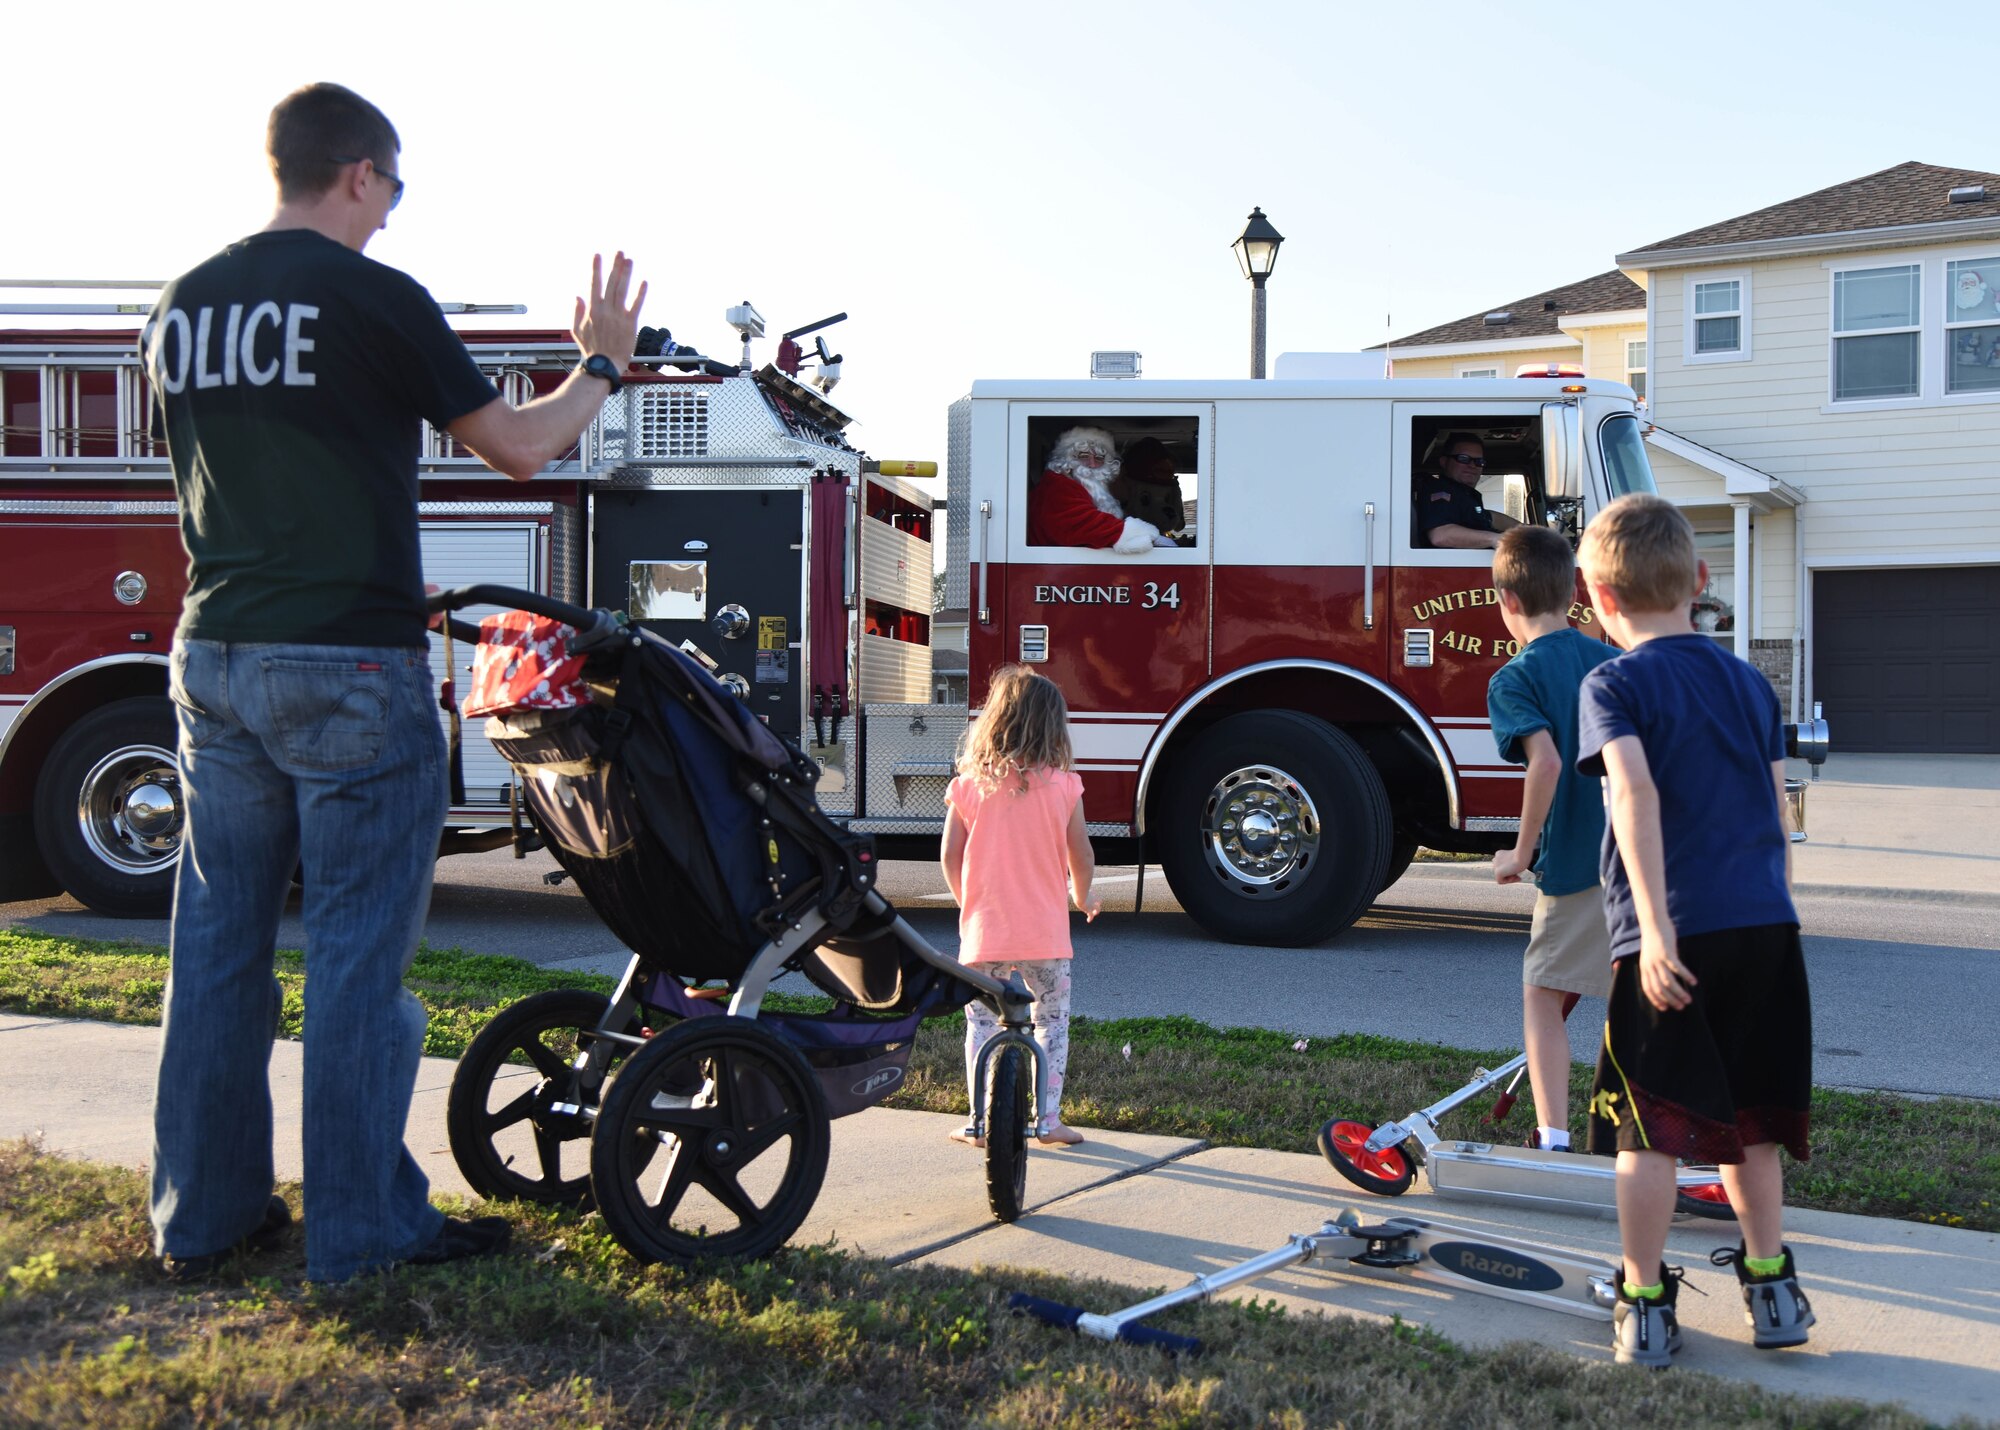 Santa throws candy to children from a fire truck in Bay Ridge housing Dec. 21, 2017, on Keesler Air Force Base, Mississippi. Santa and fire department members drove through each housing area to spread Christmas cheer to Airmen and their families. (U.S. Air Force photo by Kemberly Groue)